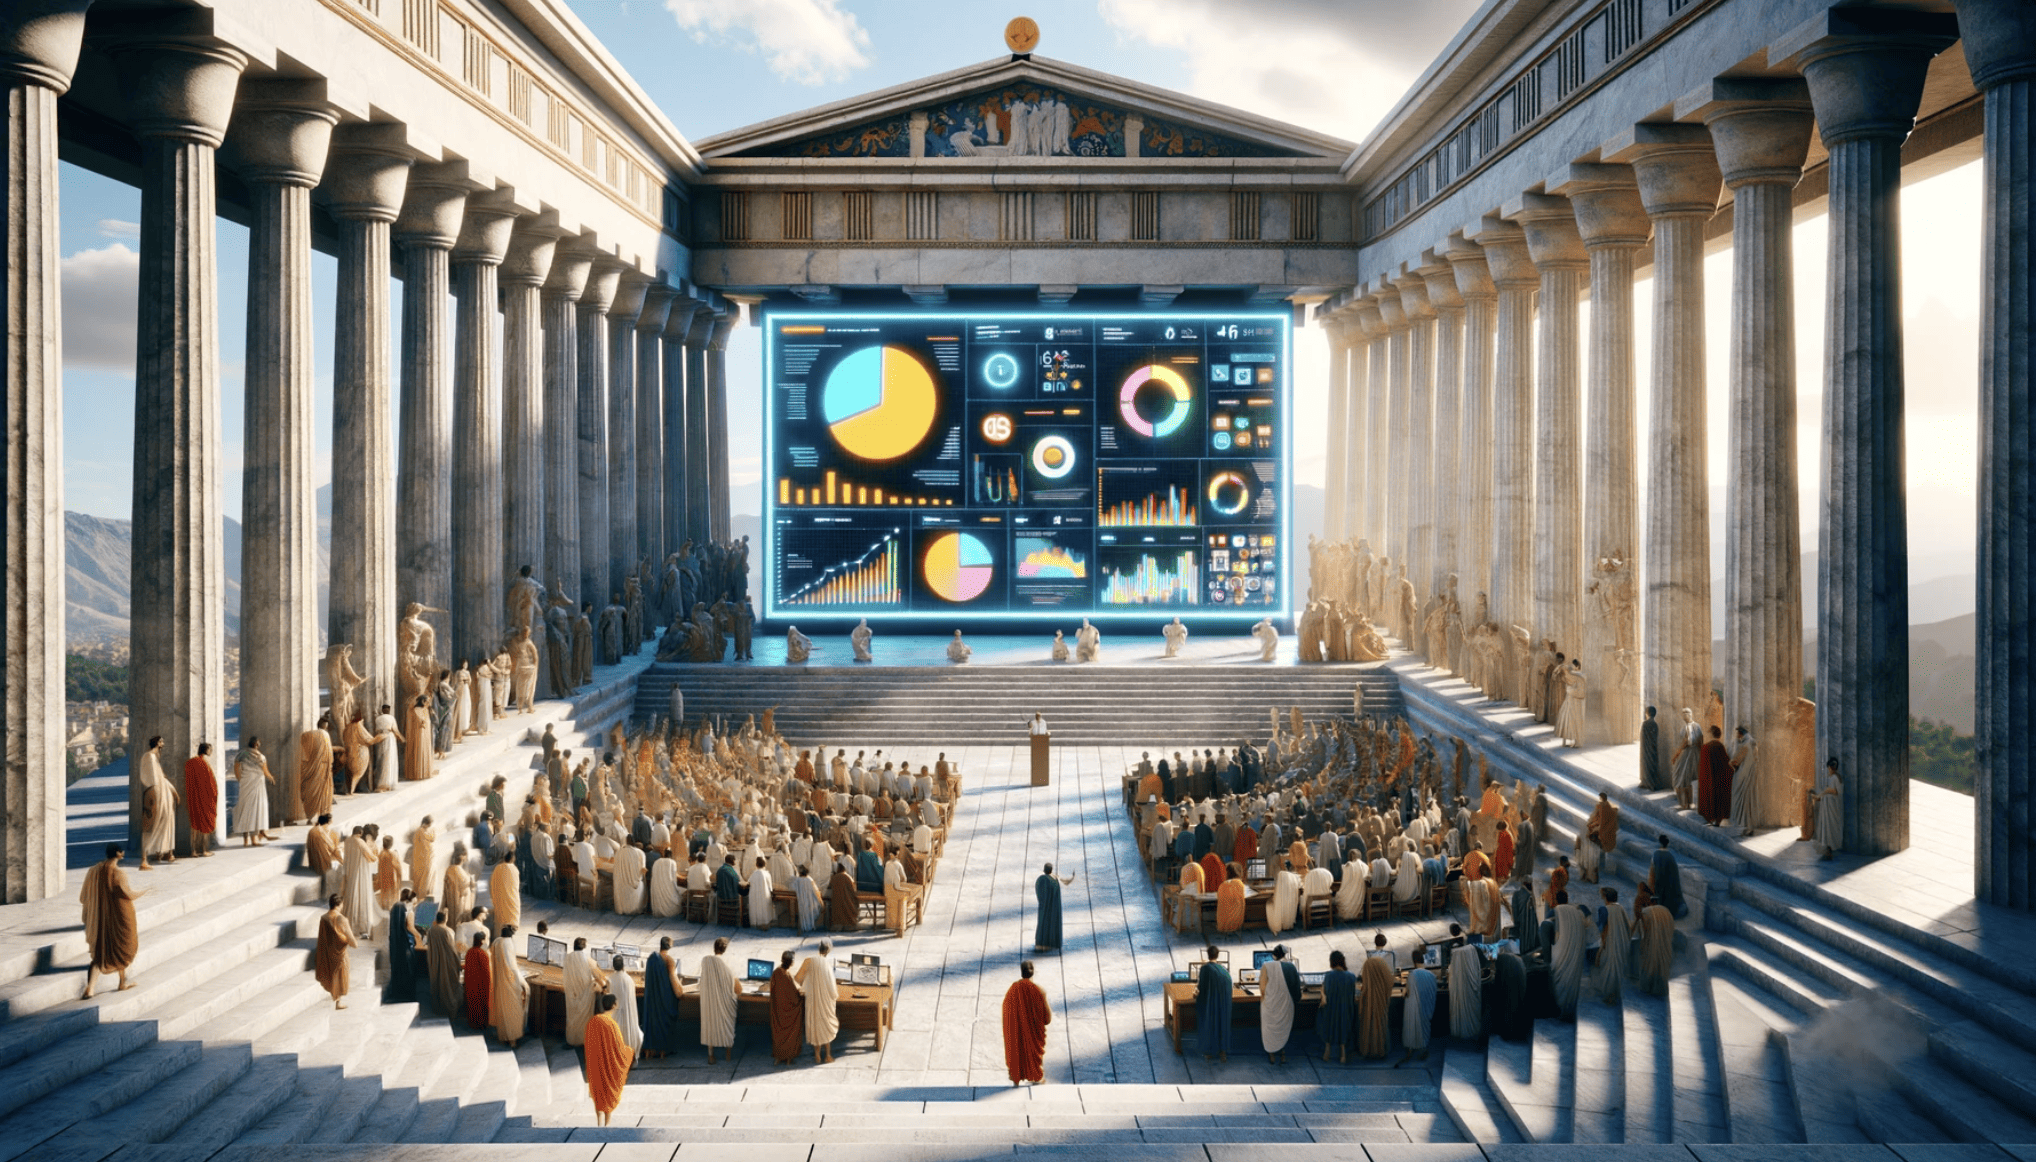 a classical Greek democratic gathering of people in the outside agora, discussing the hot topics of today. At the end of the meeting hall, there's a 21st-centry big screen with all sorts of data, social media referrals and infographics with pie charts. 4k --ar 16:9